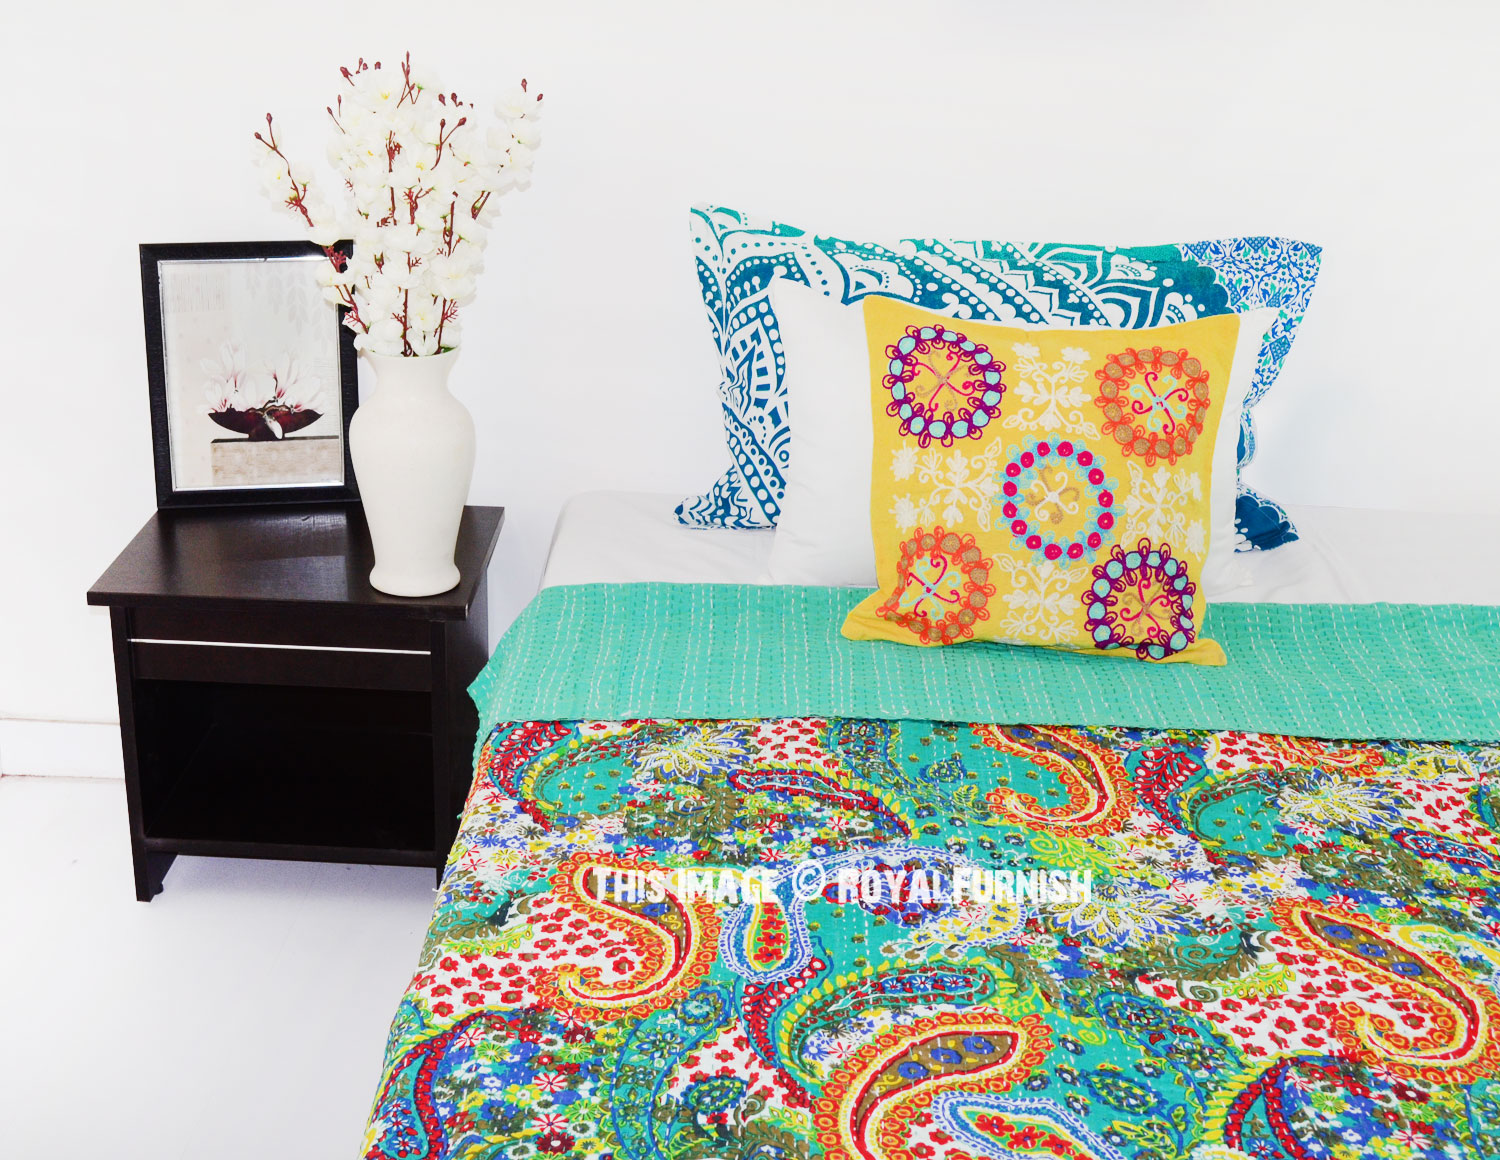 Details about   New Indian Art Handmade Paisley Cotton Kantha Quilt Twin Size Bedspreads Blanket 